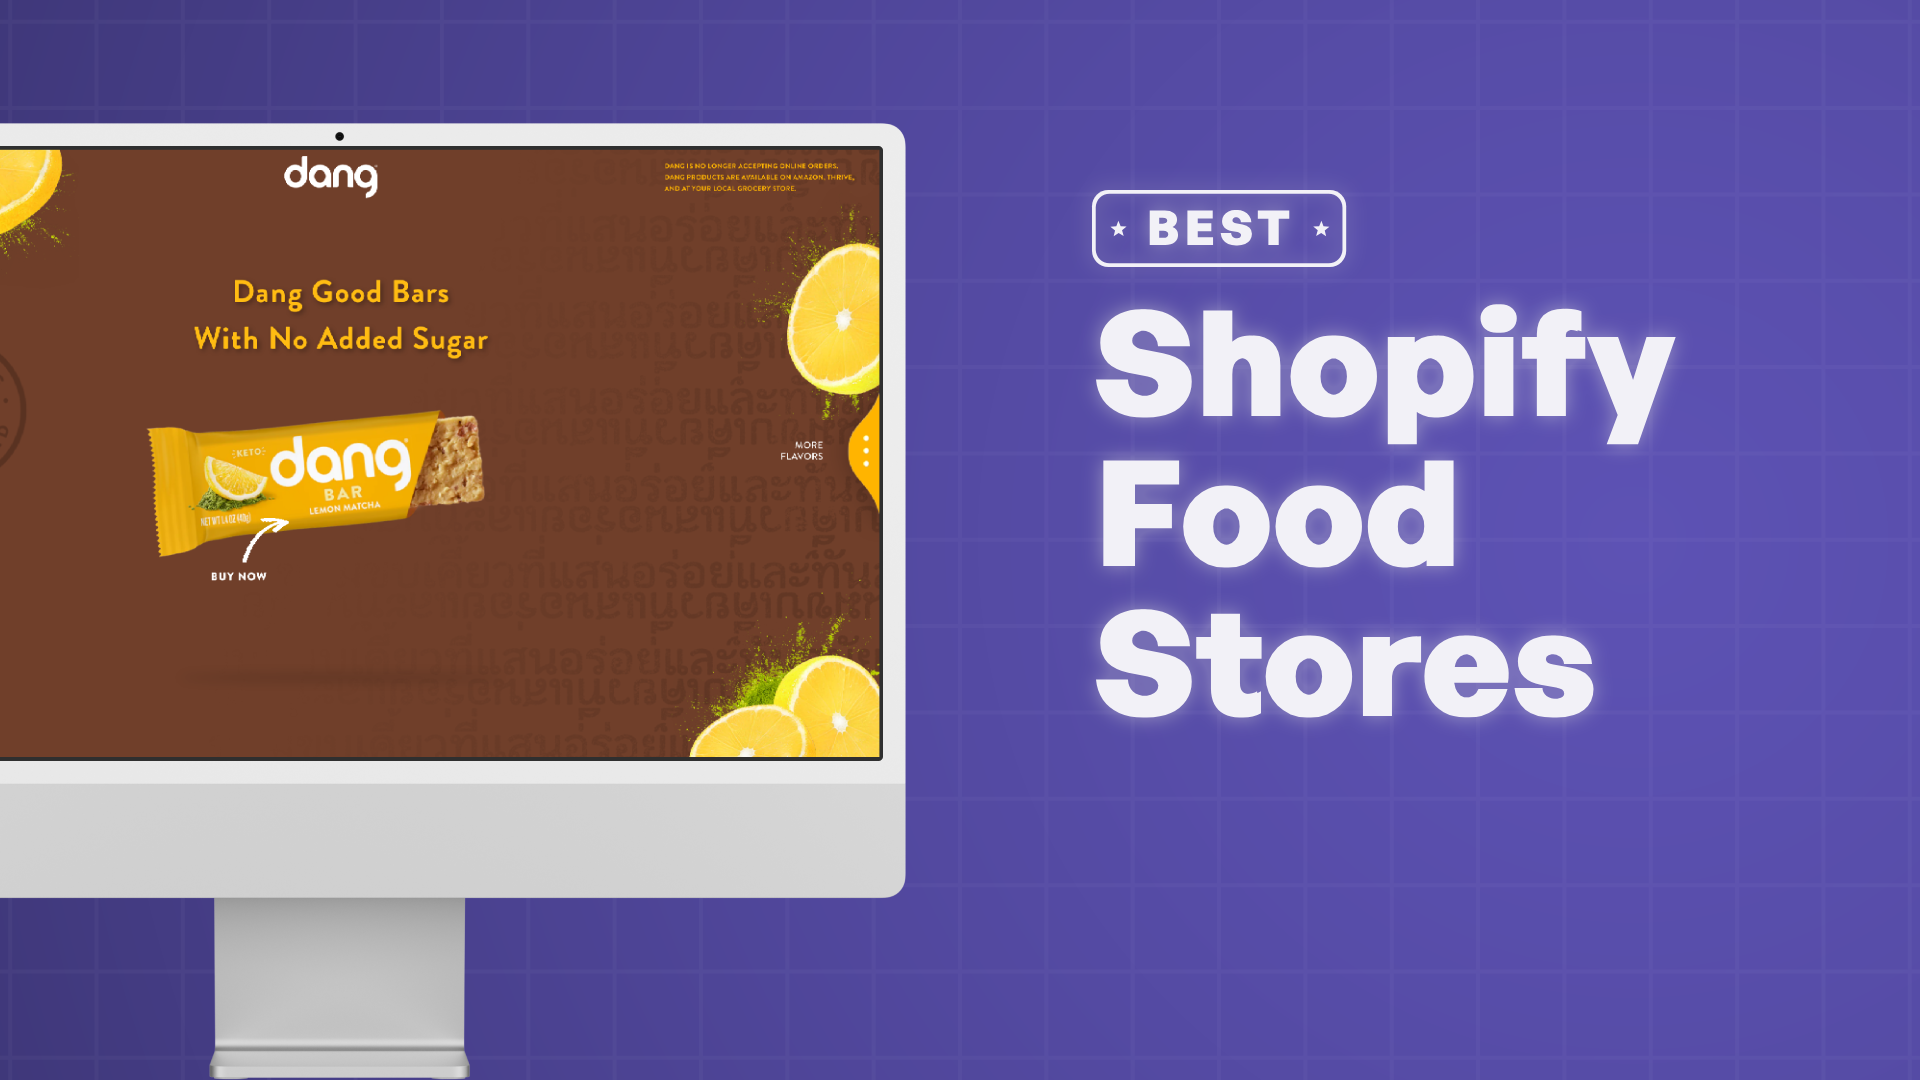 "Best Food and Beverage Websites on Shopify" with screenshots of the food and beverage stores on Shopify